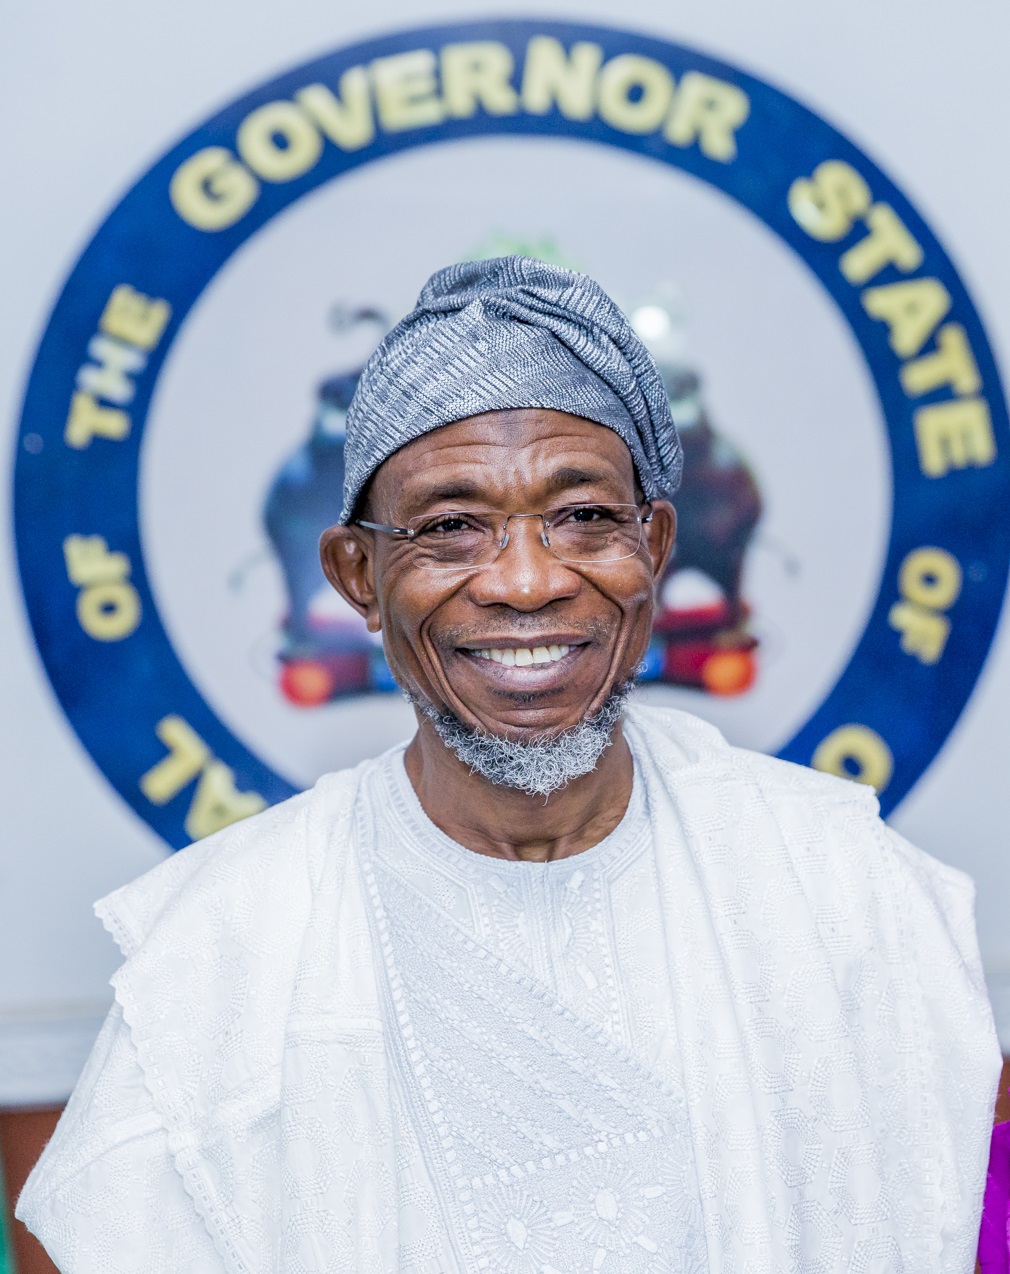 Aregbesola: Giant Strides of the ‘Ajele’ at 60! By Abiodun Komolafe